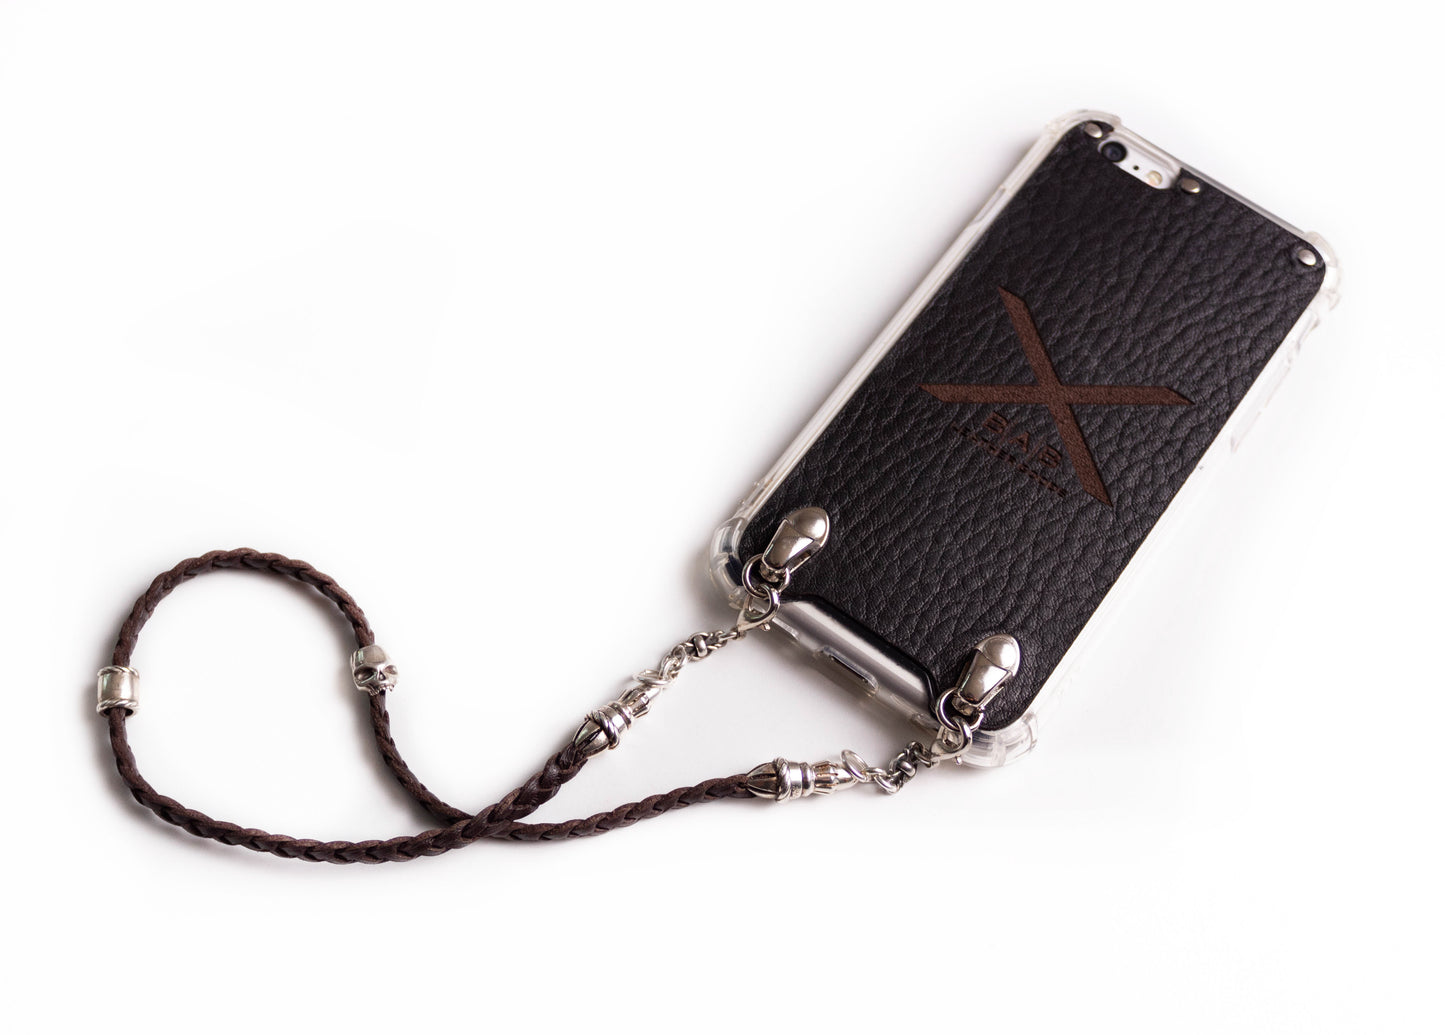 Full-Grain Genuine vegetable-tanned Leather & 925 Sterling Silver Case for iPhone. Bracelet/Choker/Strap 3 double strands of hand-braided Leather, Brown or Black.- F03